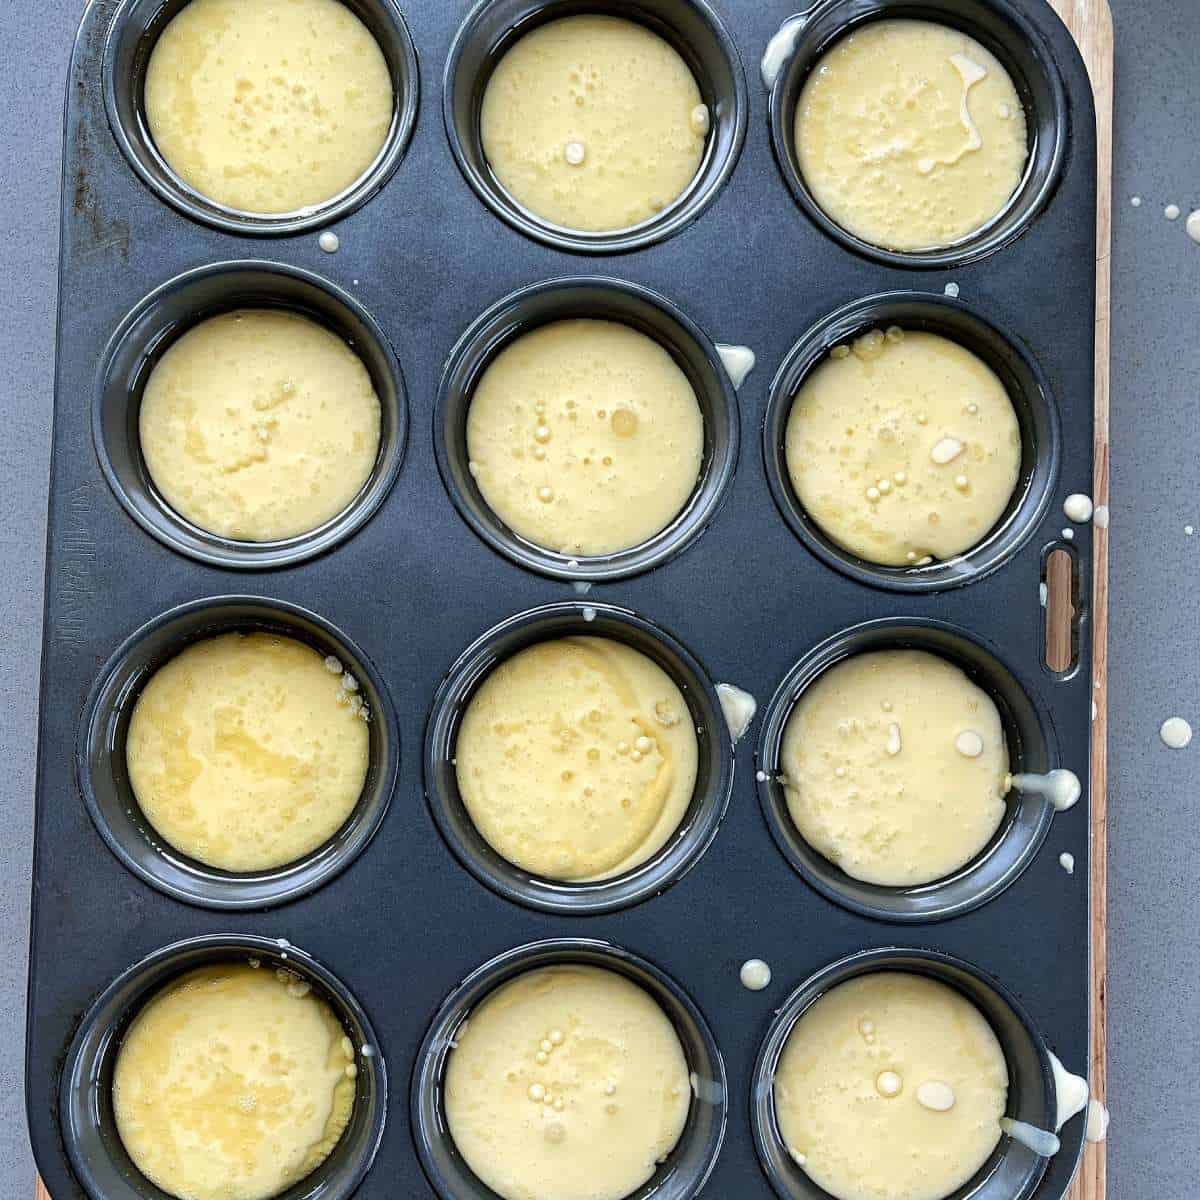 Uncooked Yorkshire pudding batter in a muffin tin